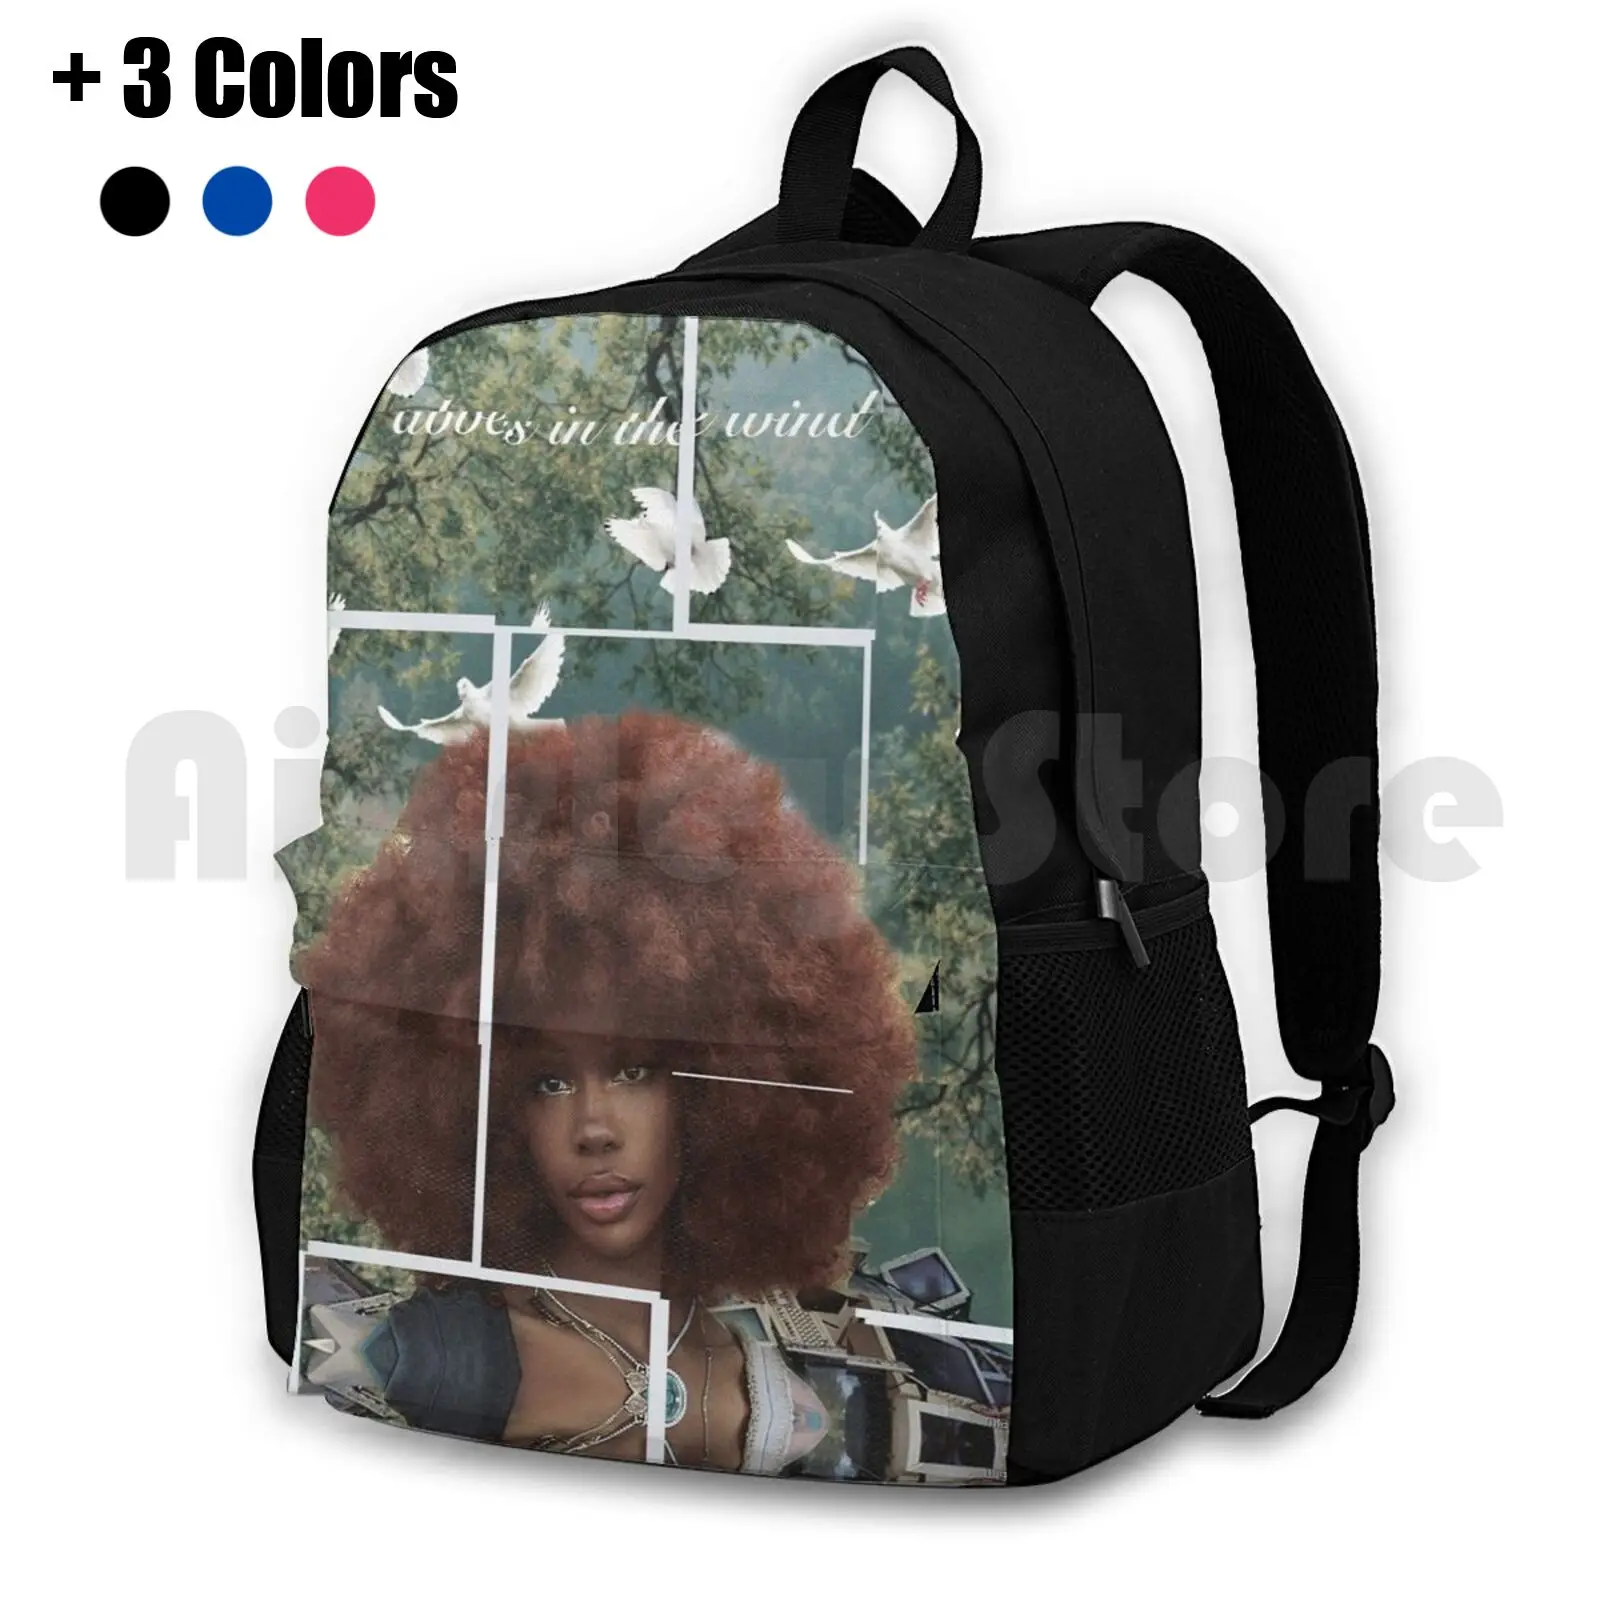 

Sza Outdoor Hiking Backpack Waterproof Camping Travel Sza Solana Sza Music Ctrl Love Galore Music Music Art Sza Doves In The